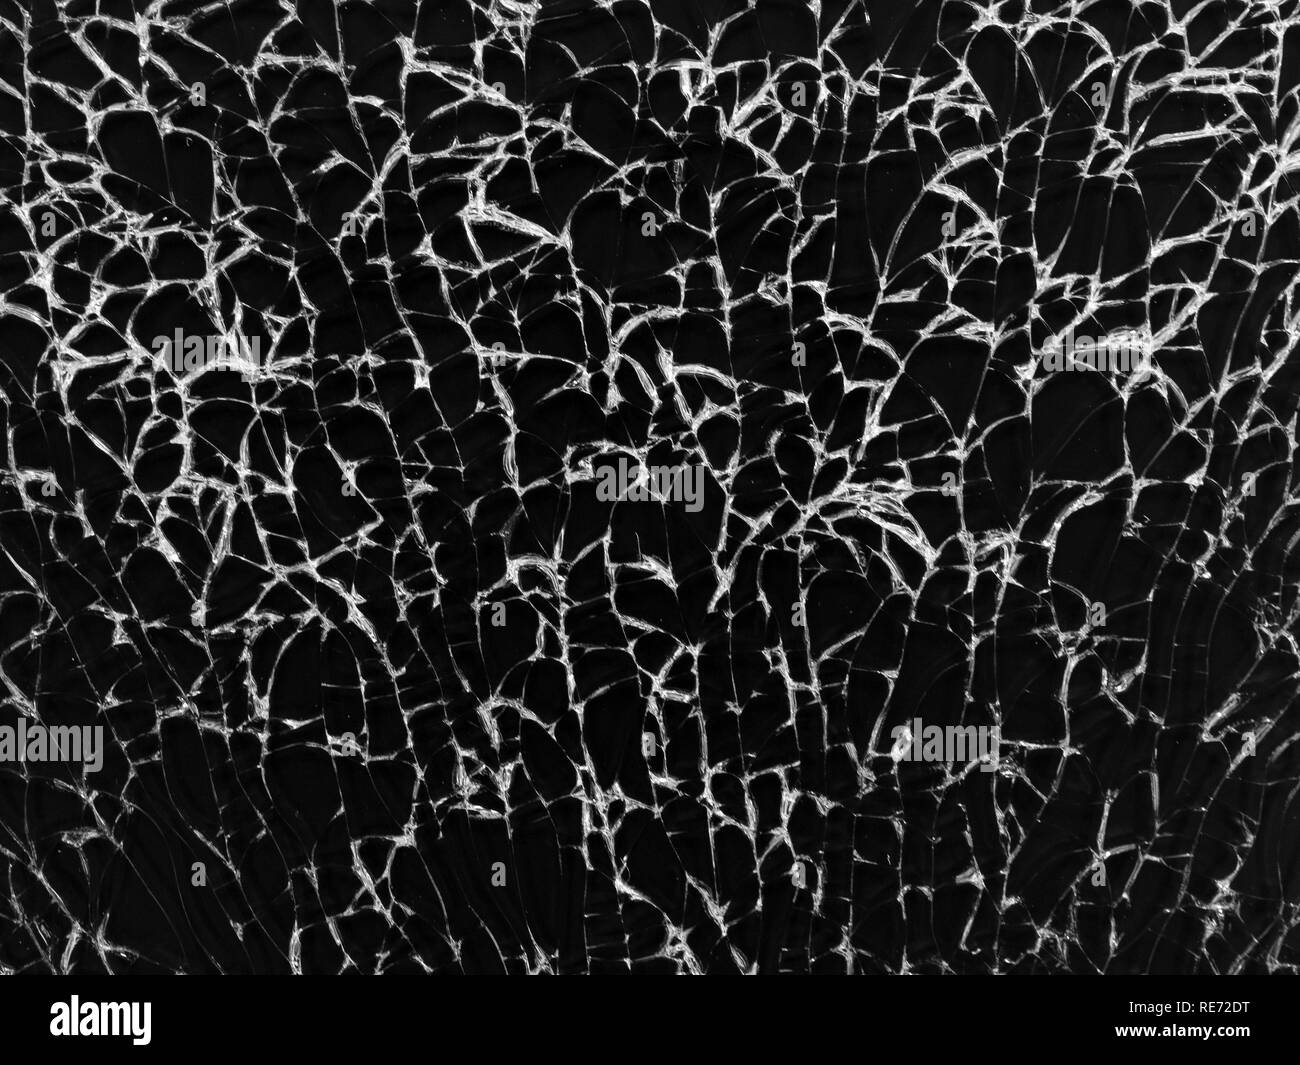 Cracked glass texture on black background. Isolated realistic cracked glass effect. Stock Photo